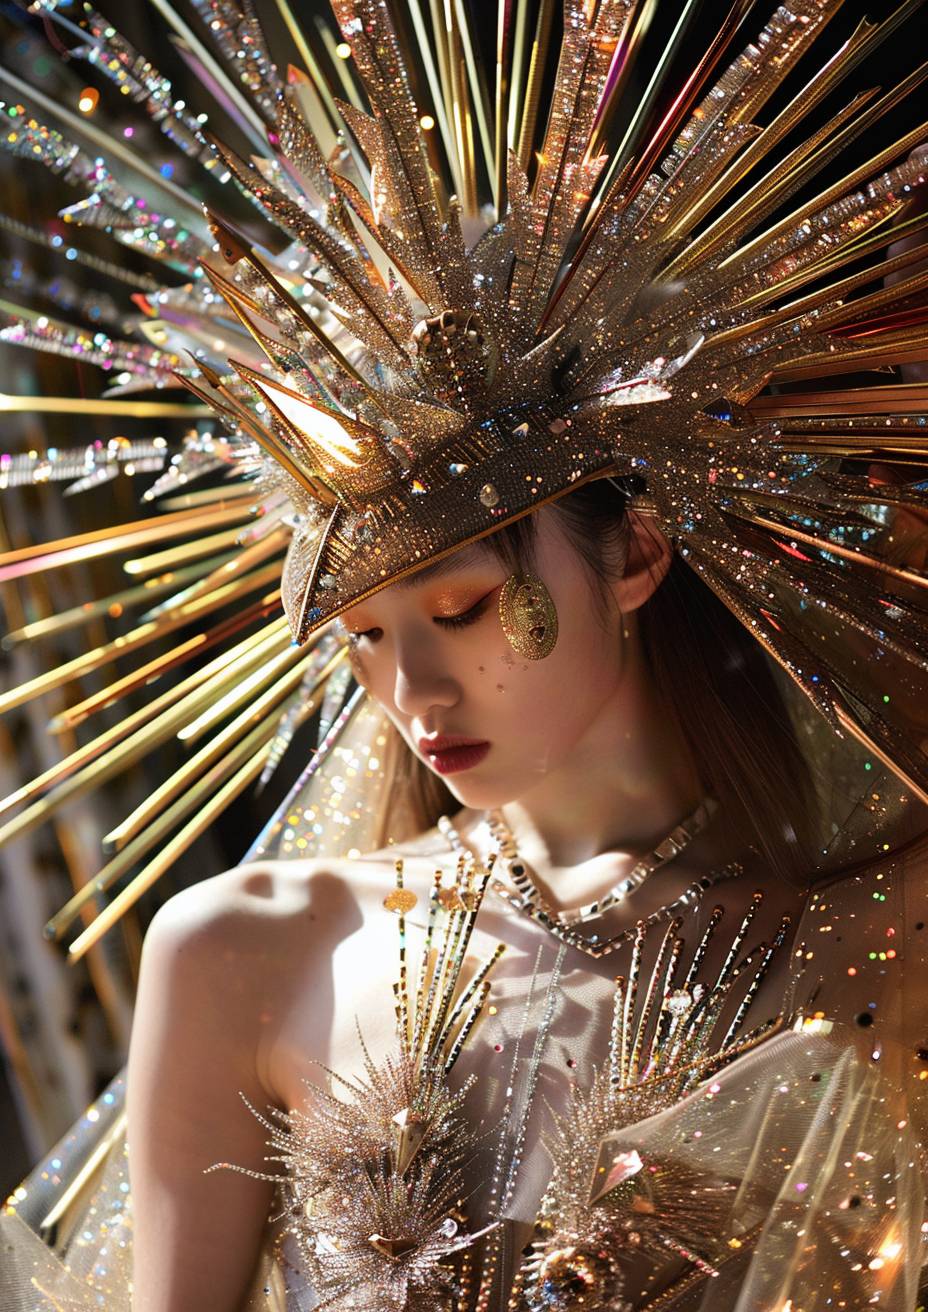 ghastly glitchpunk, low-angle perspective, red carpet starlet wearing a gold and silver minidress and headpiece with arrow-like spikes, in the style of linked rings, future fashion